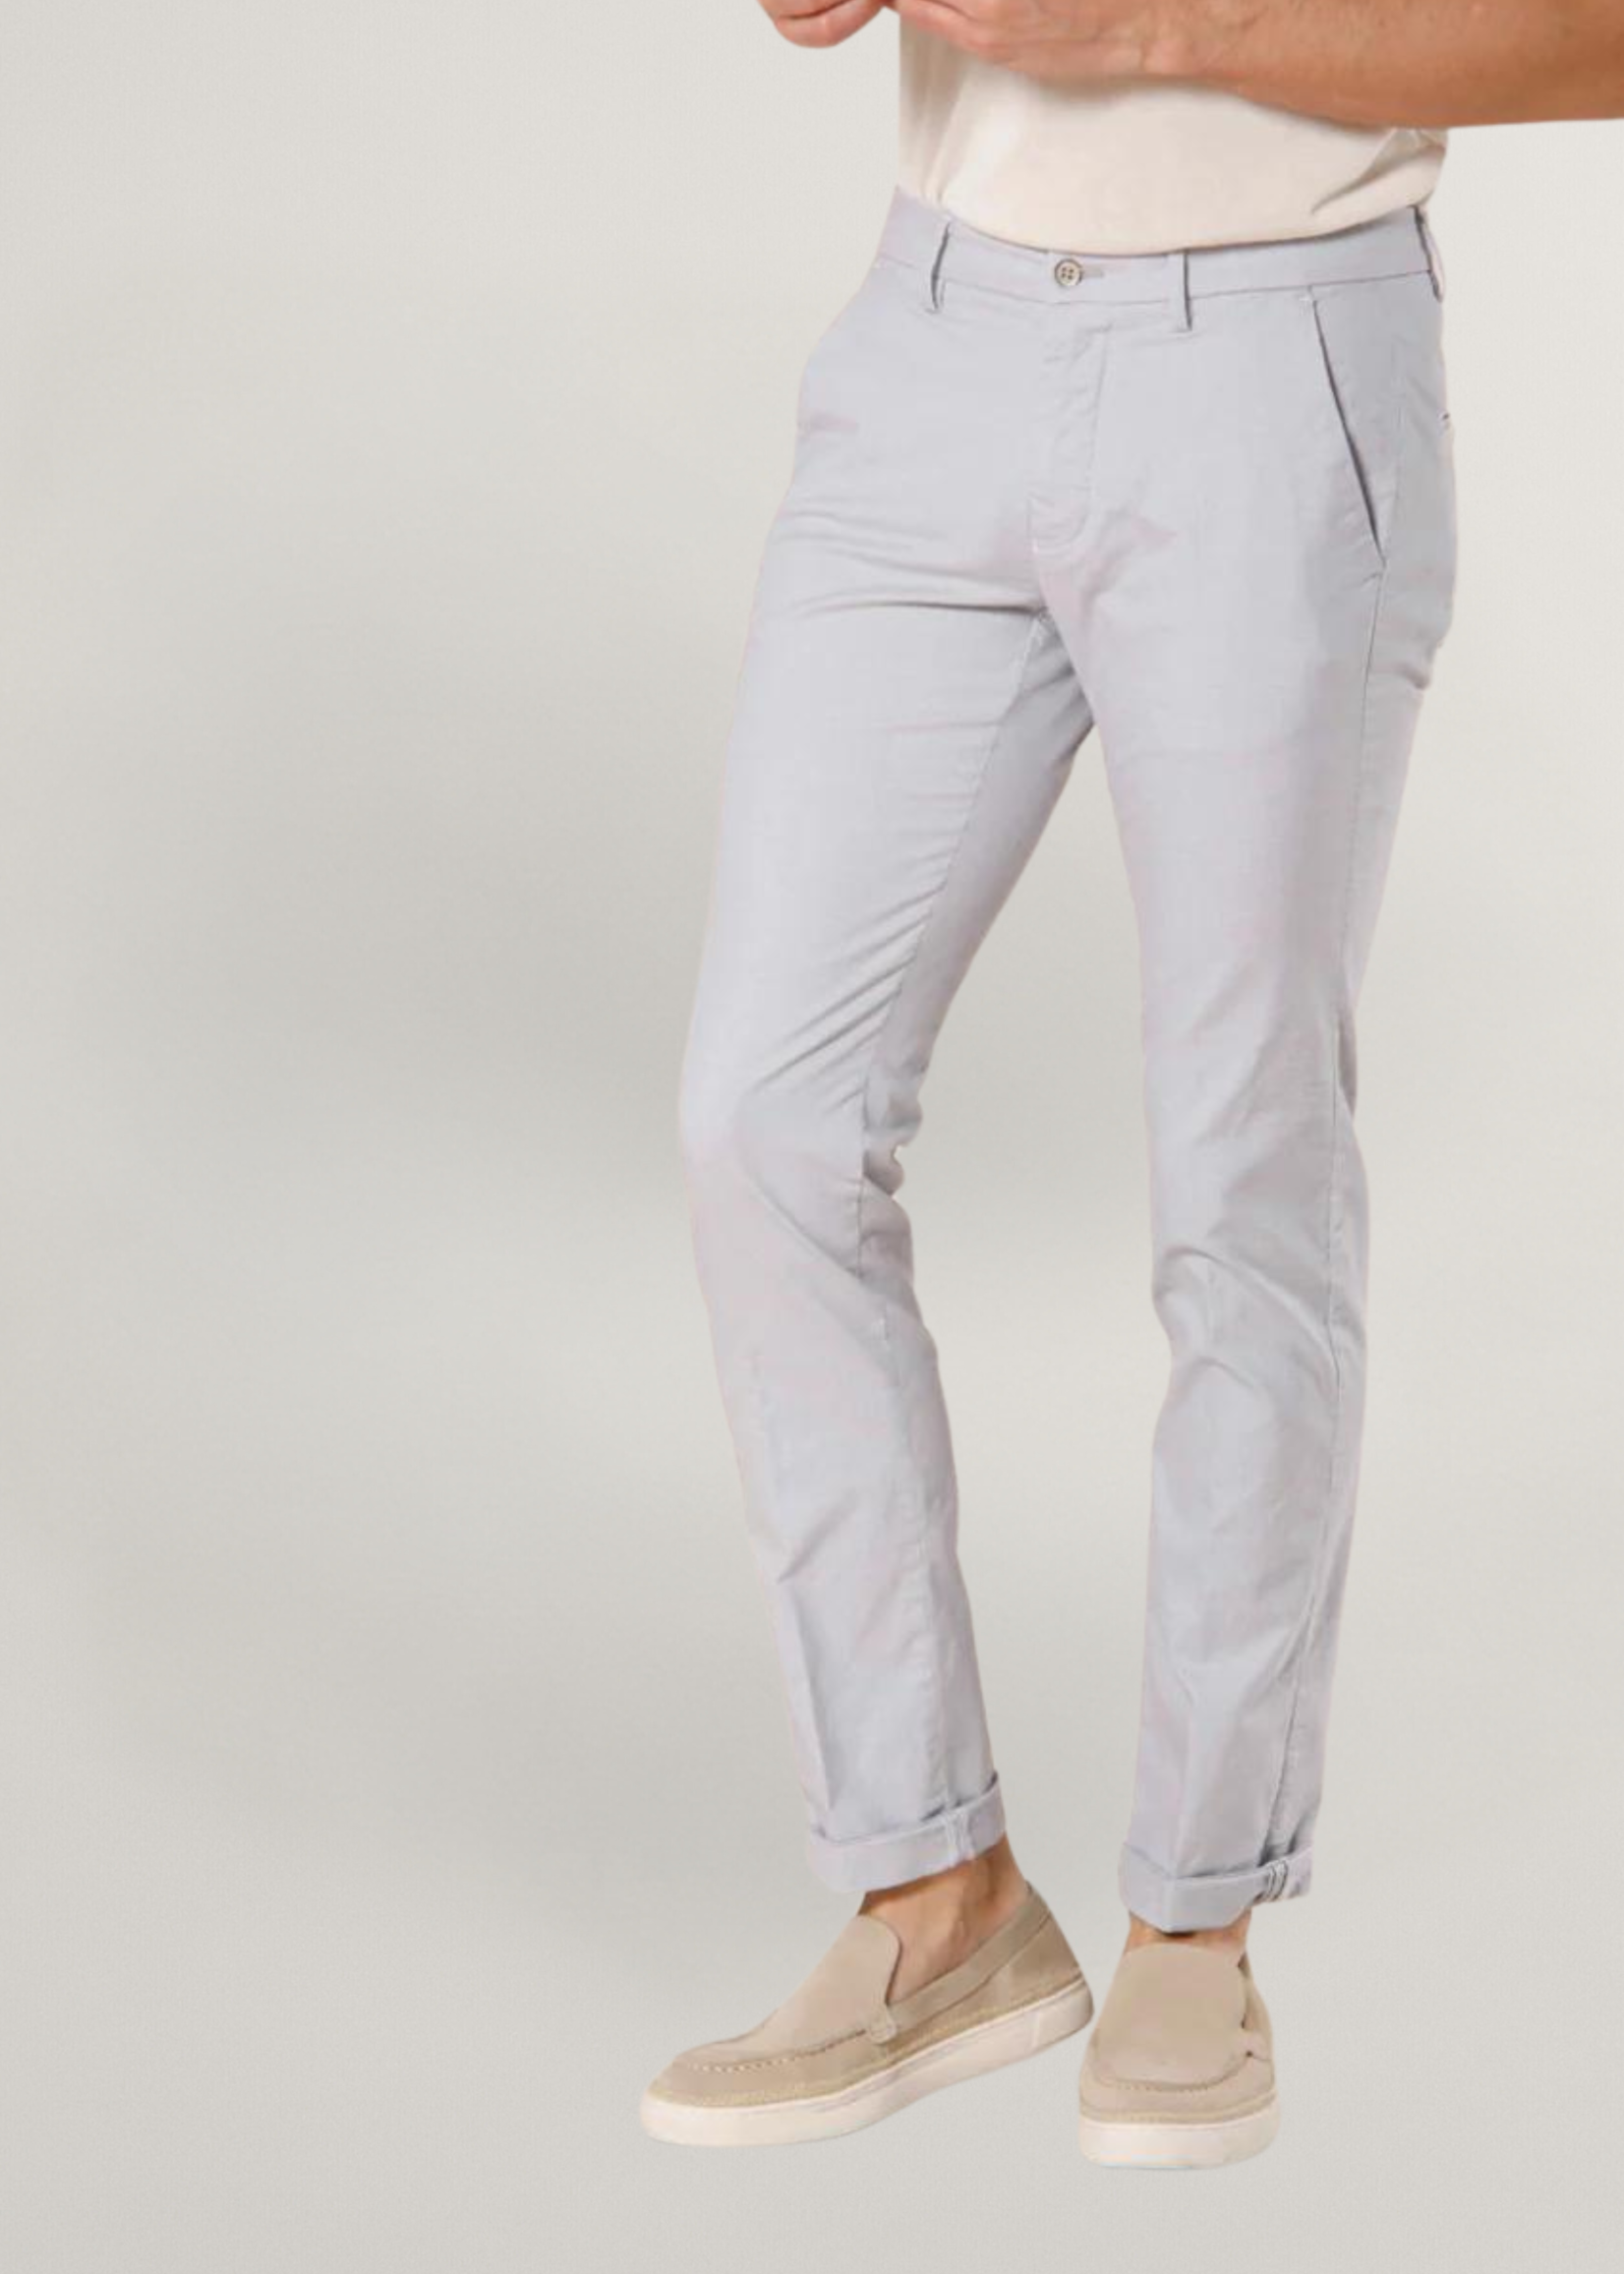 MASON'S Torino Limited men's chino pants in cotton and tencel with microfantasy slim - White